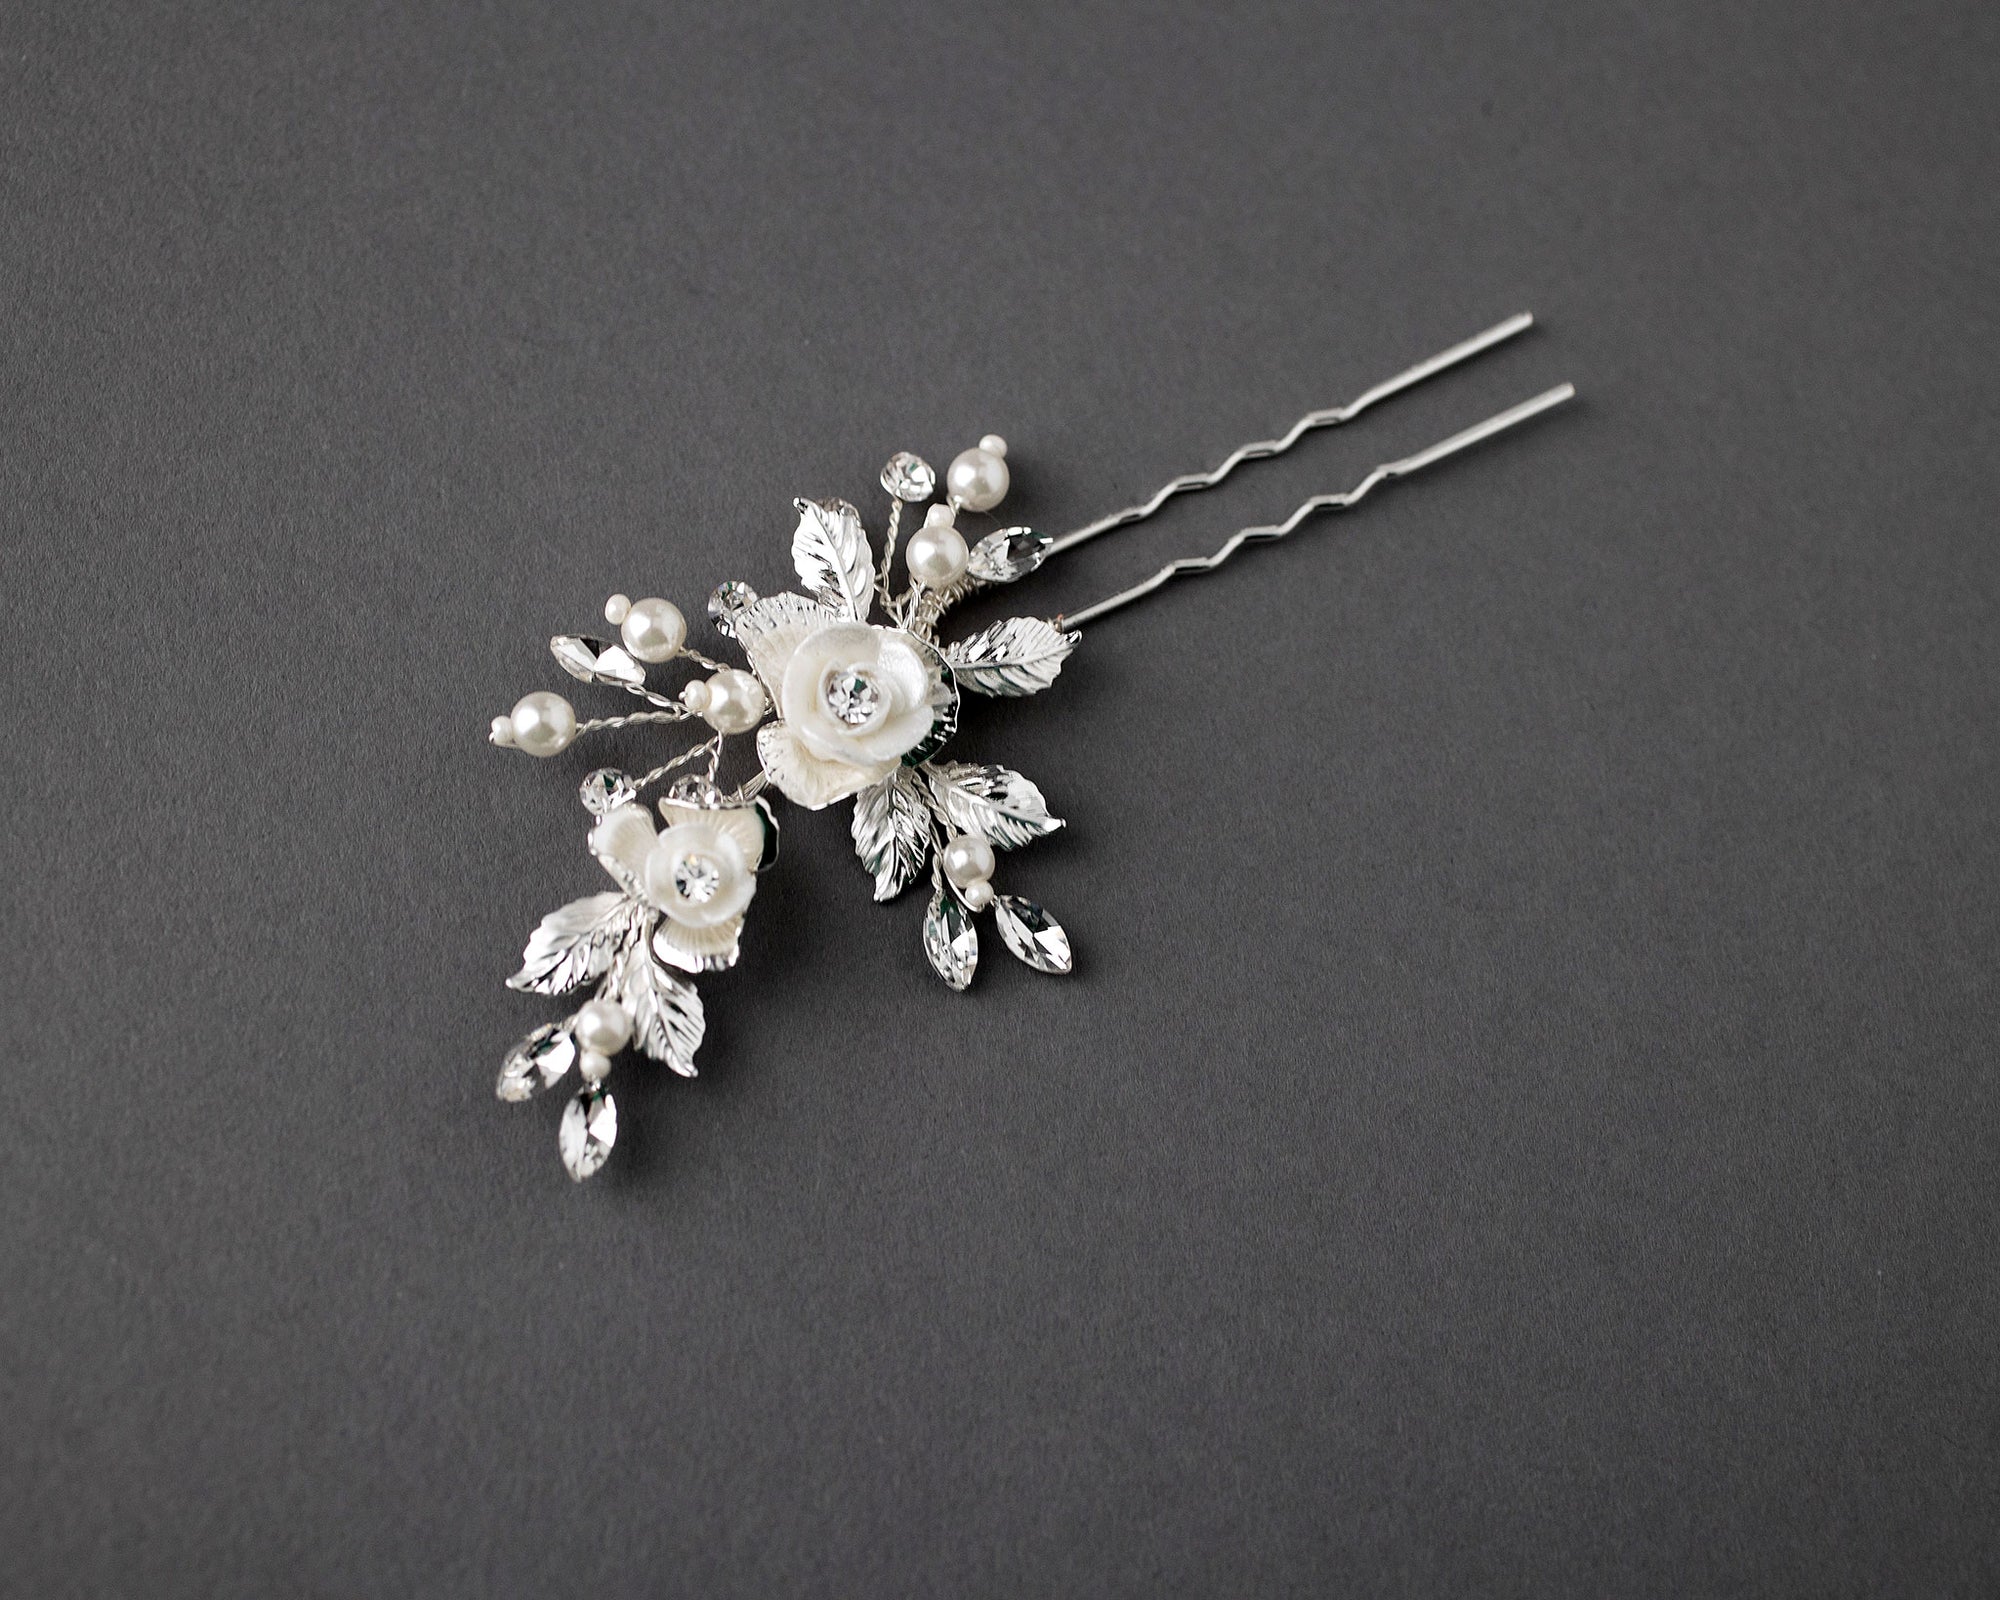 This stunning hair pin features bright porcelain flowers in ivory, adorned with marquise crystal stones for a sophisticated look that adds a subtle sparkle to your bridal hairstyle. Crafted from silver or light gold leaves and petals, this decorative piece measures 2.75 by 1.75 inches, making it the perfect choice for any blushing bride.